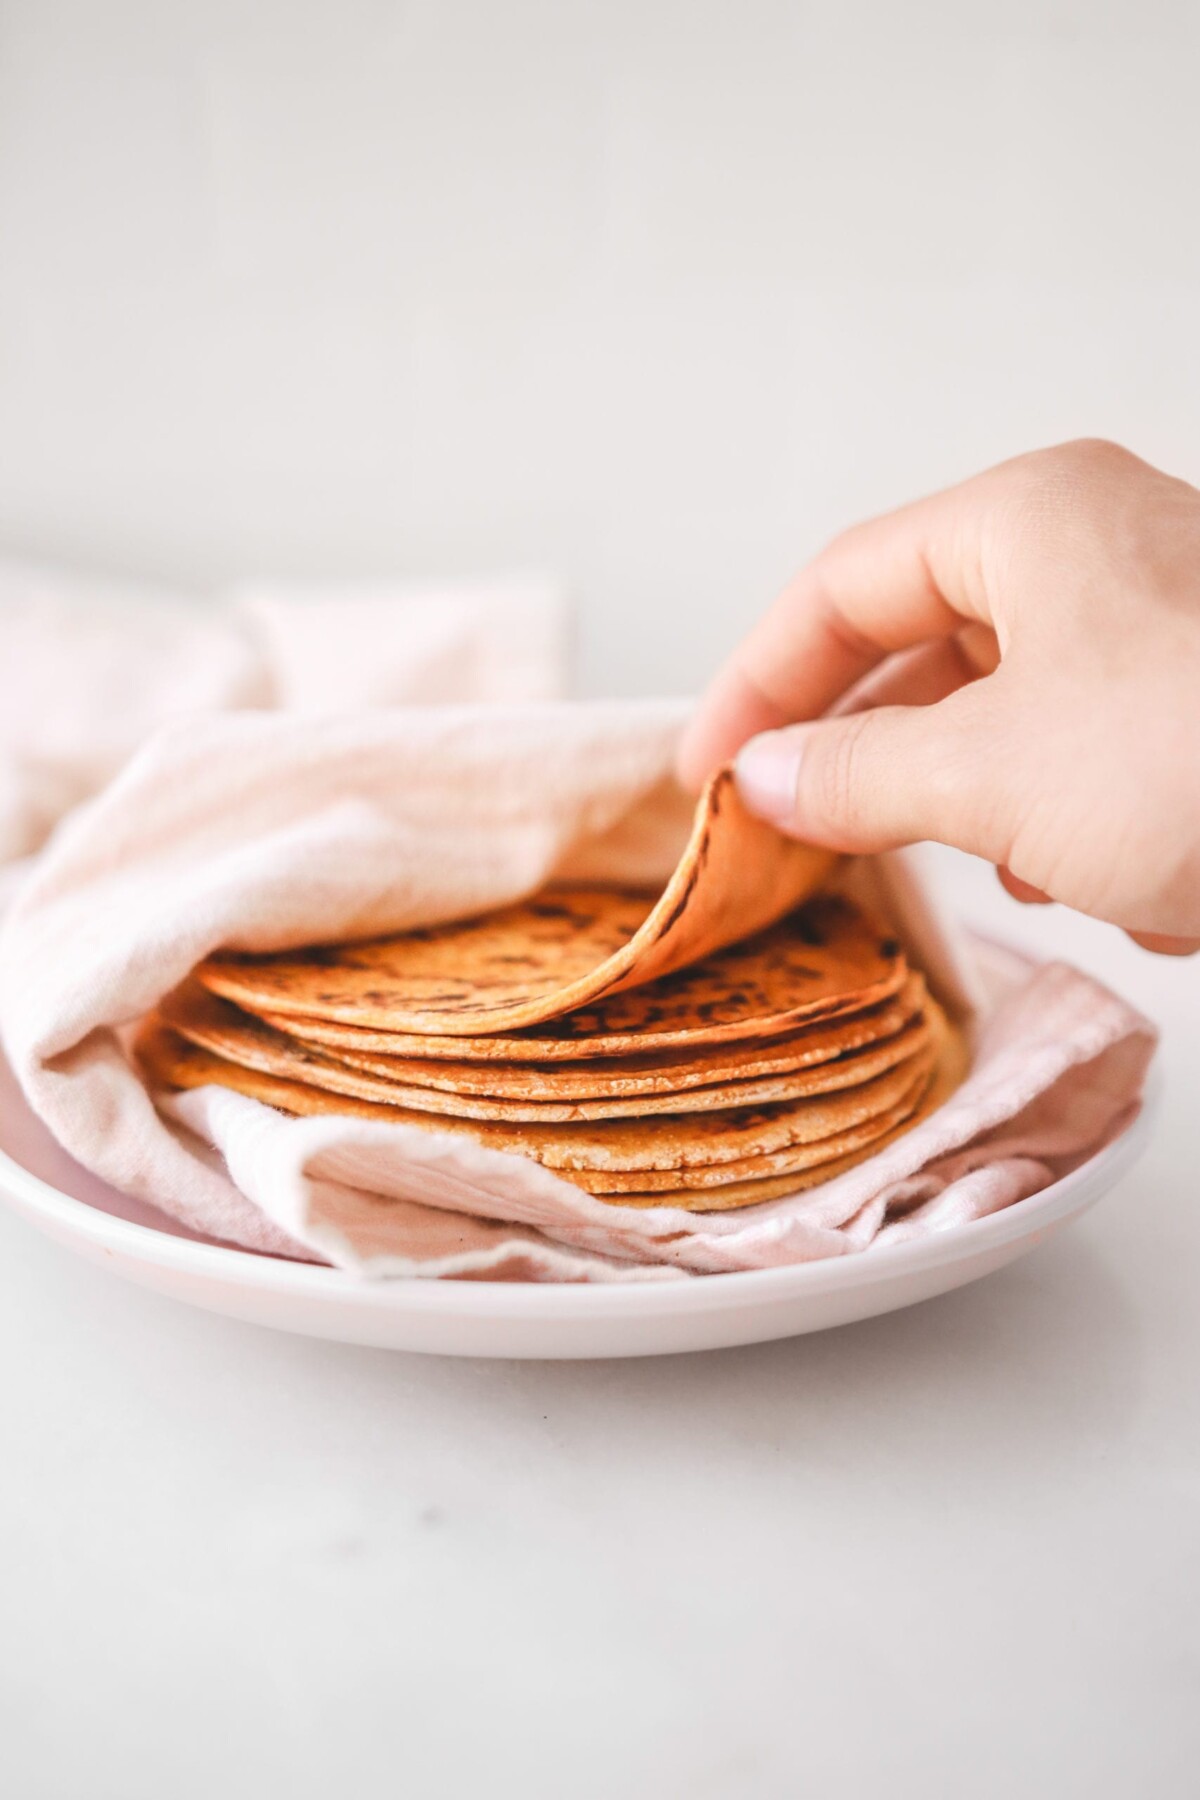 a hand picking up a sweet potato tortilla from a stack of tortillas